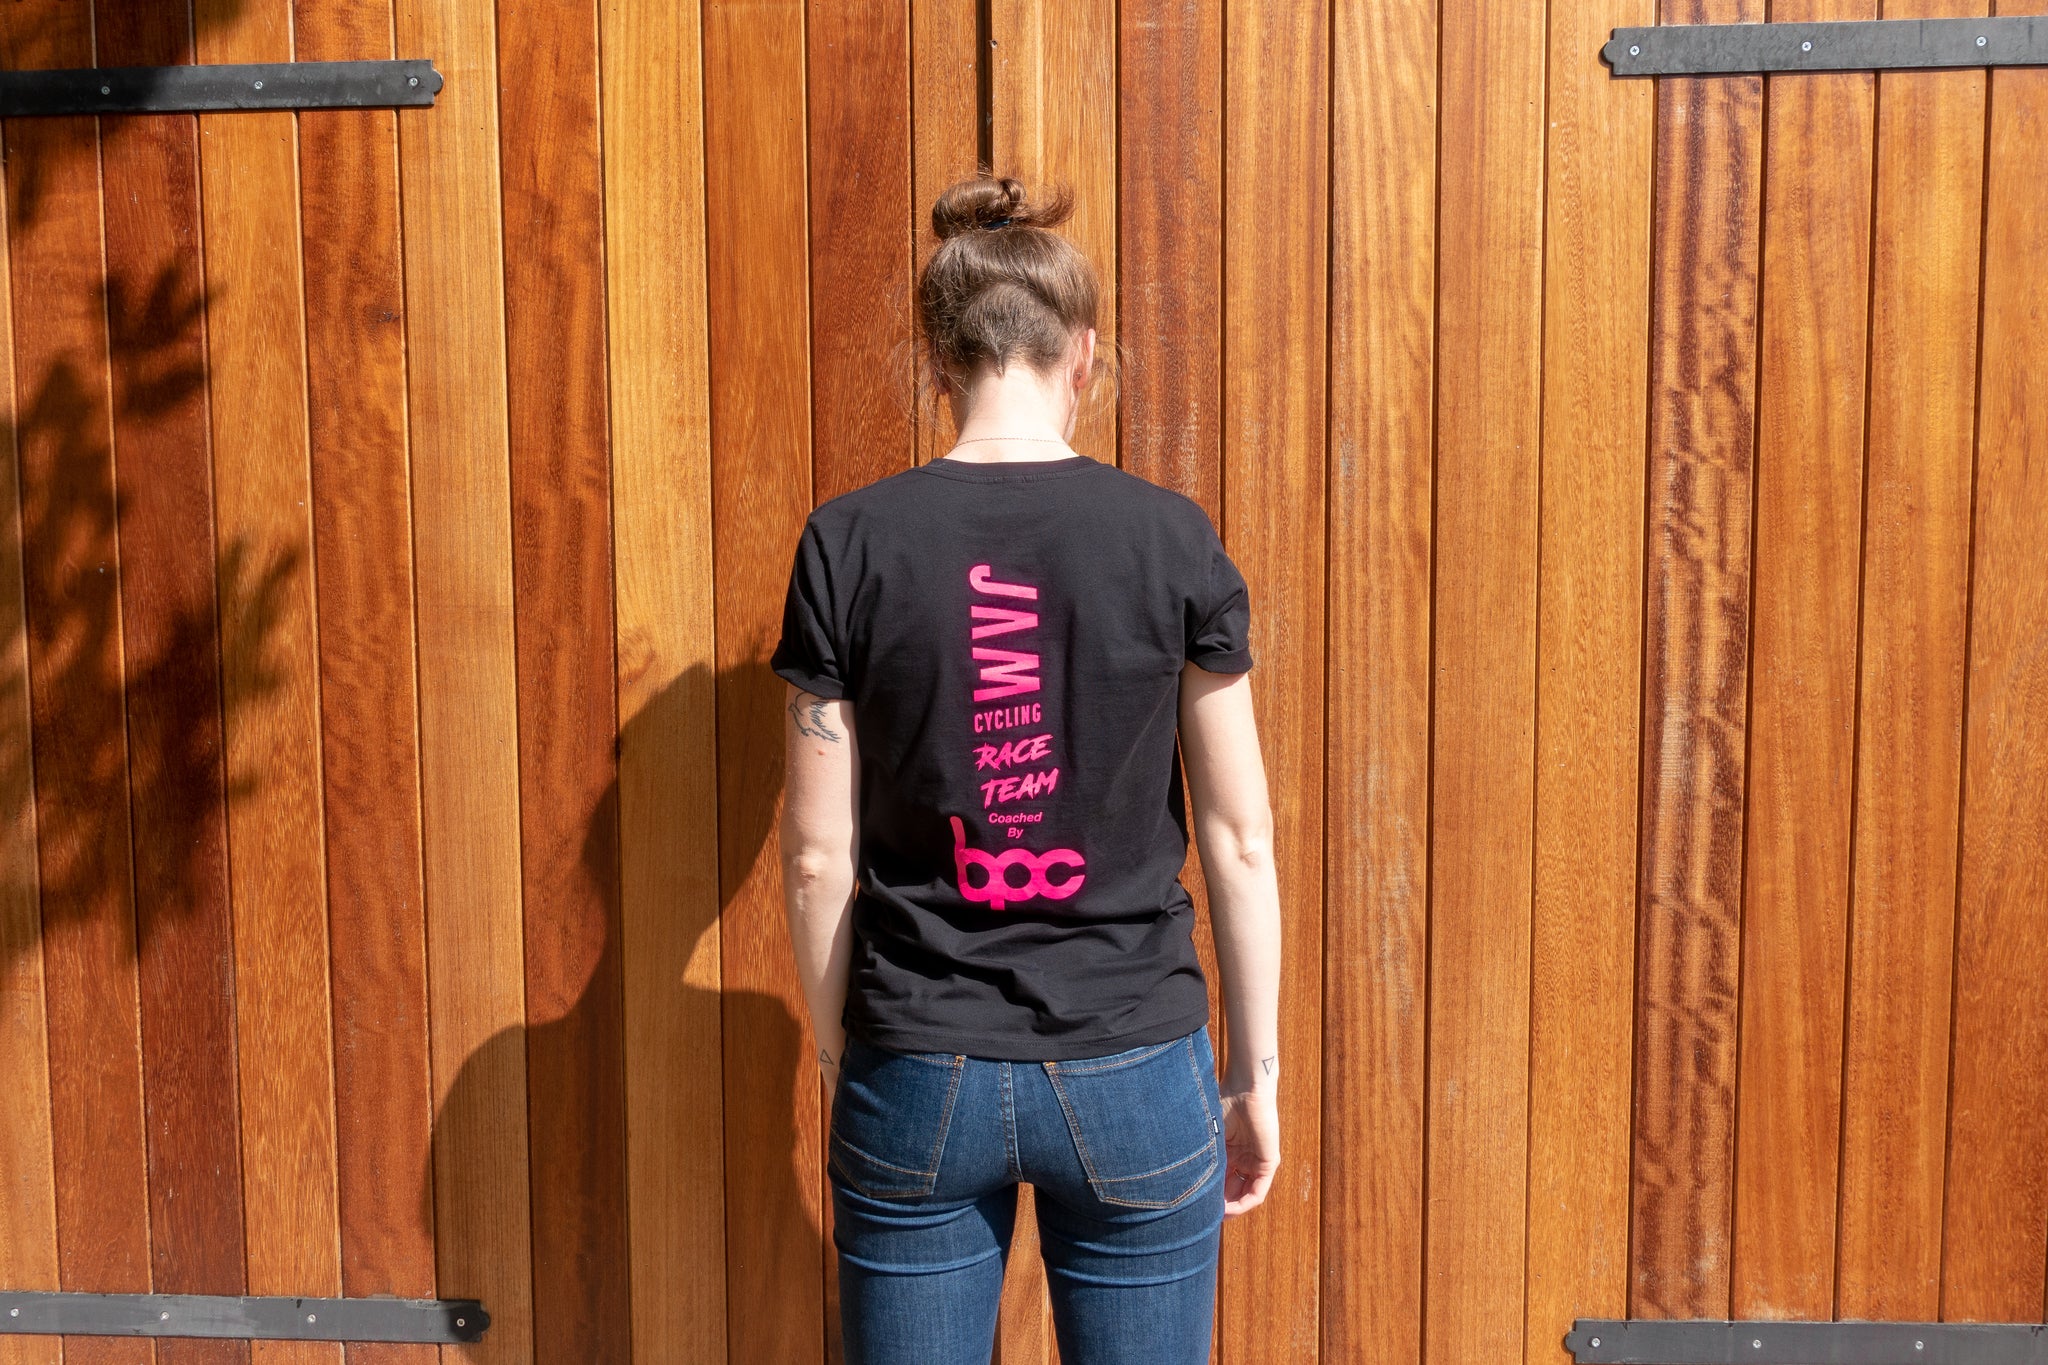 Black JAM Race team t-shirt featuring HOT logos worn by female Jam employee with blue jeans a barn door